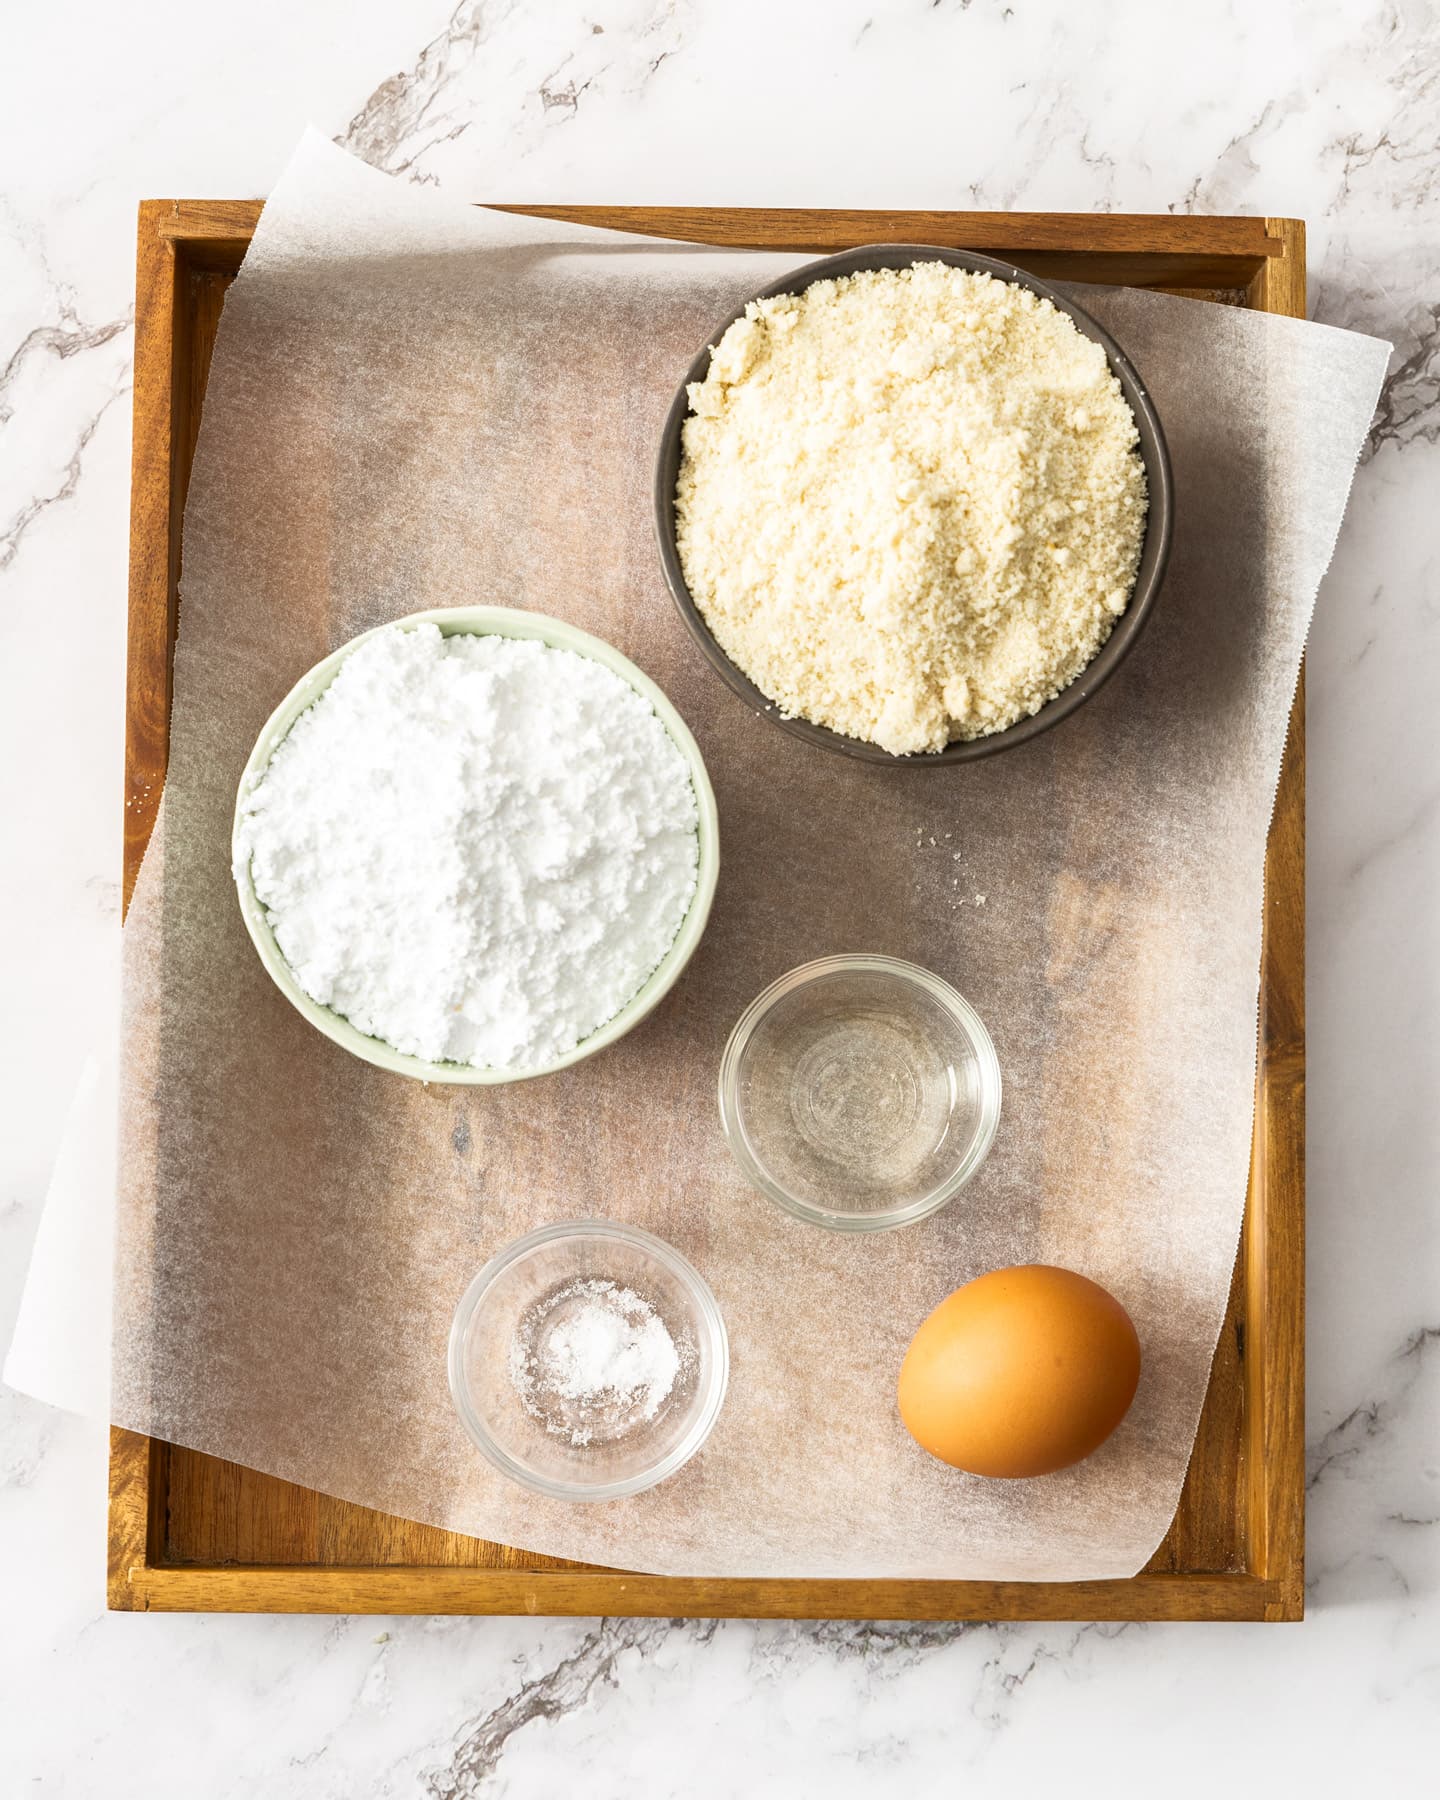 Ingredients for almond paste on a wooden tray.